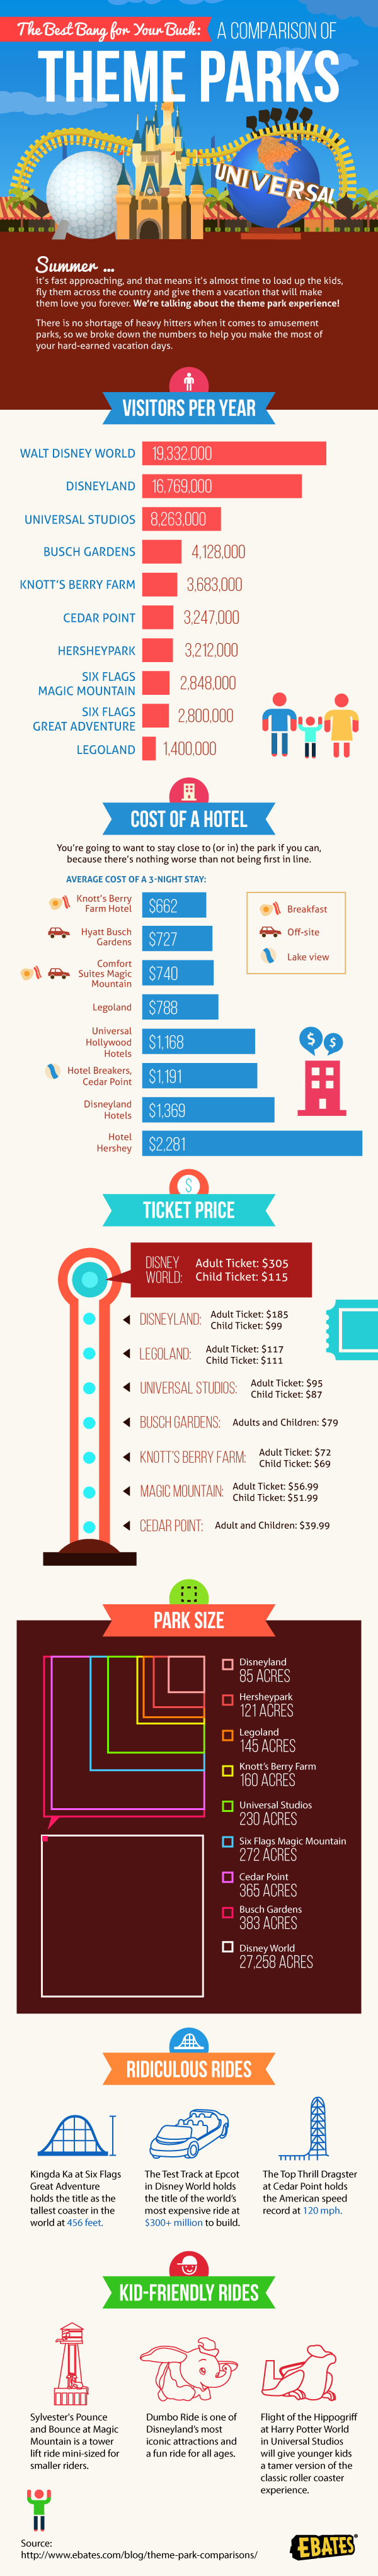 Theme Park Tickets - Find Out How to Get the Best Priced Tickets - The Best Bang for Your Buck. A Comparison of Theme Parks